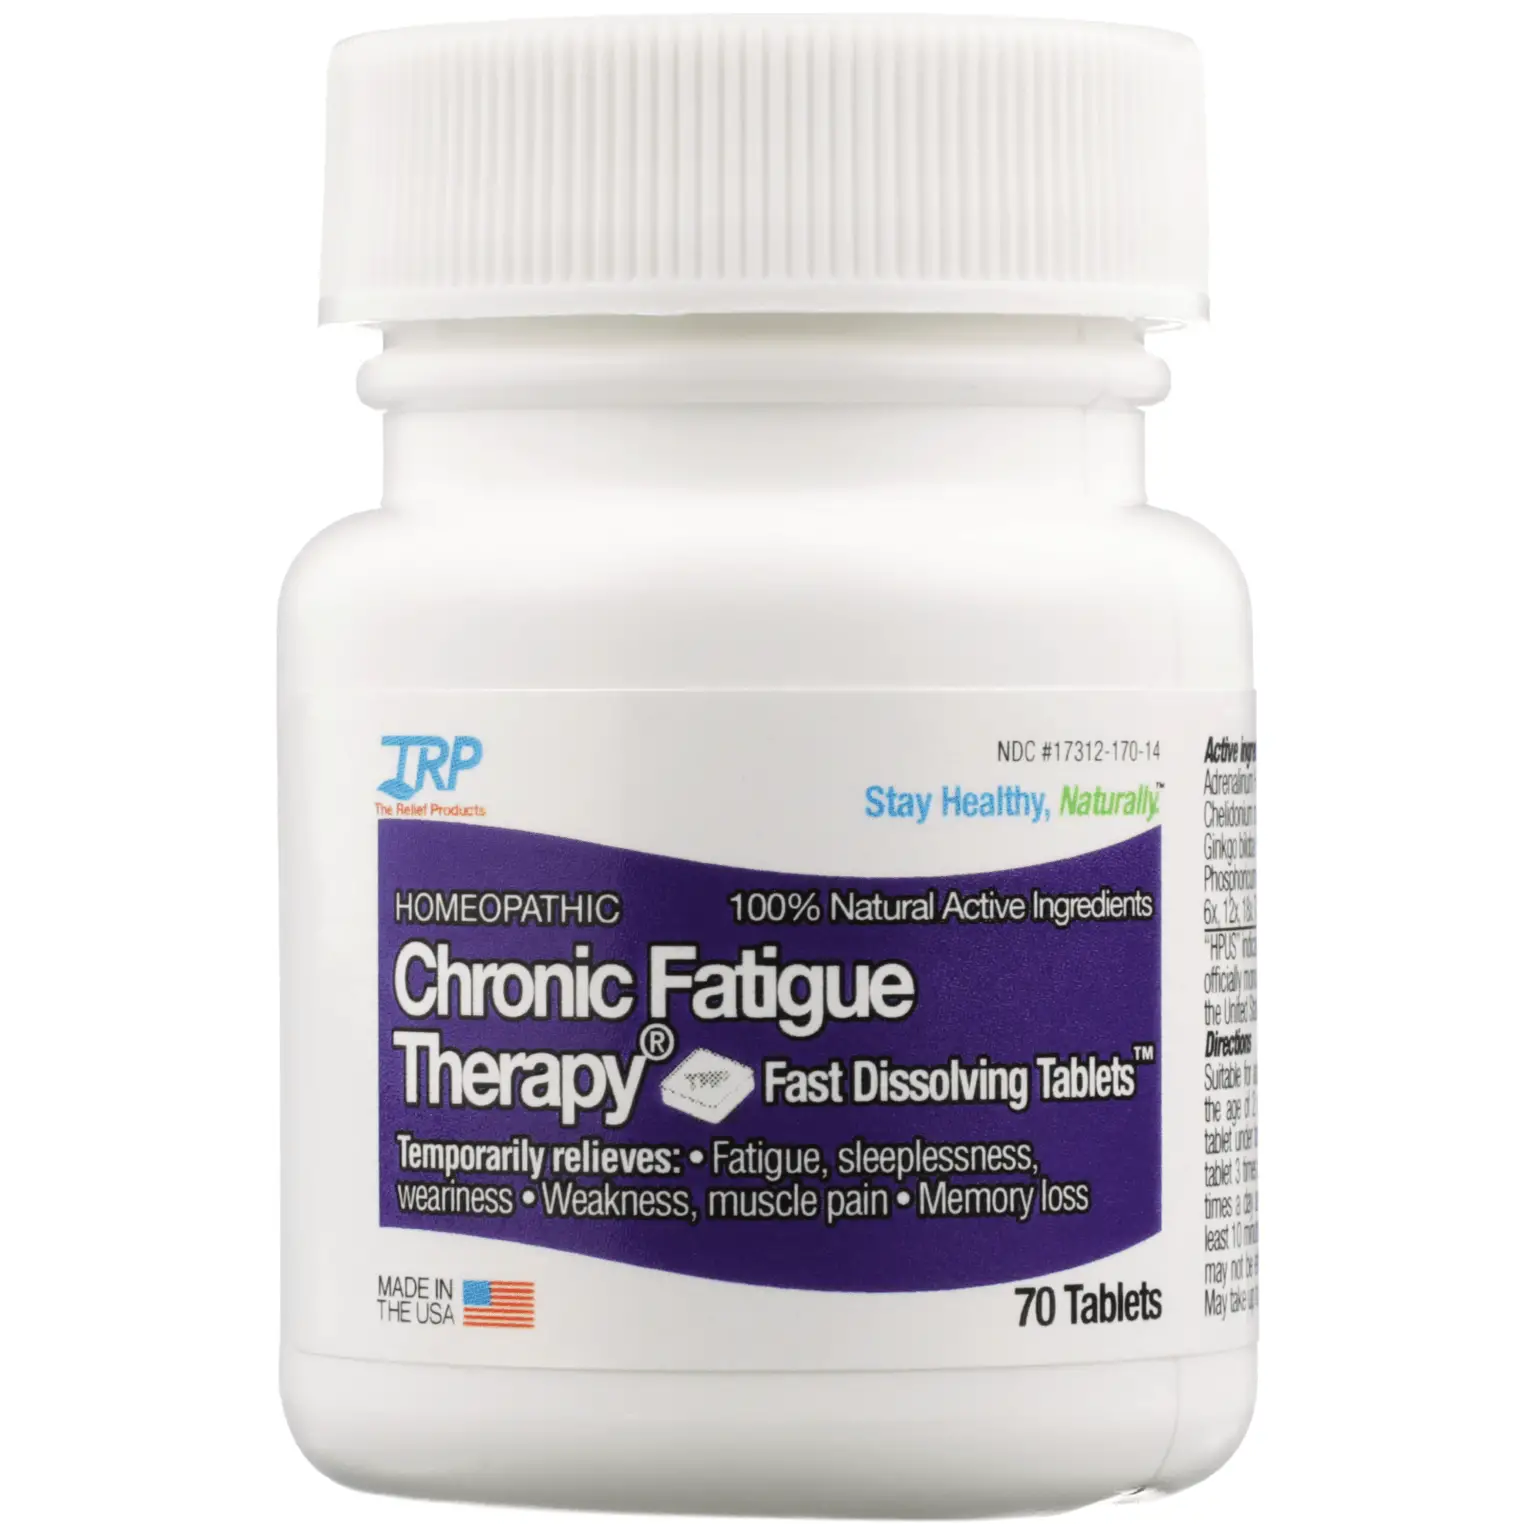 The Relief ProductsÂ® Â» Chronic Fatigue Syndrome Therapy